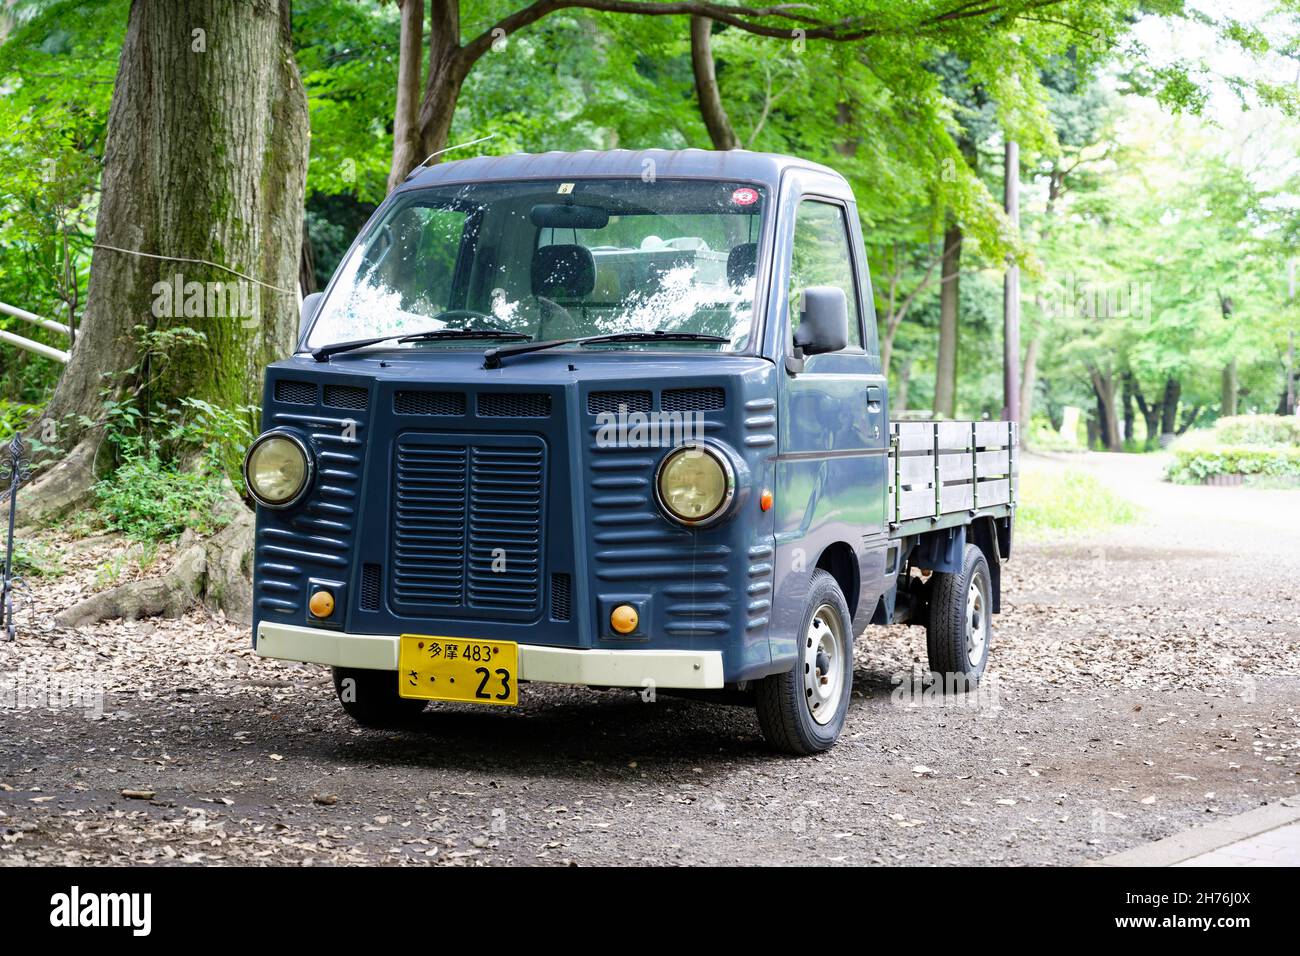 A retro pick-up truck in Tokyo, Japan. Stock Photo